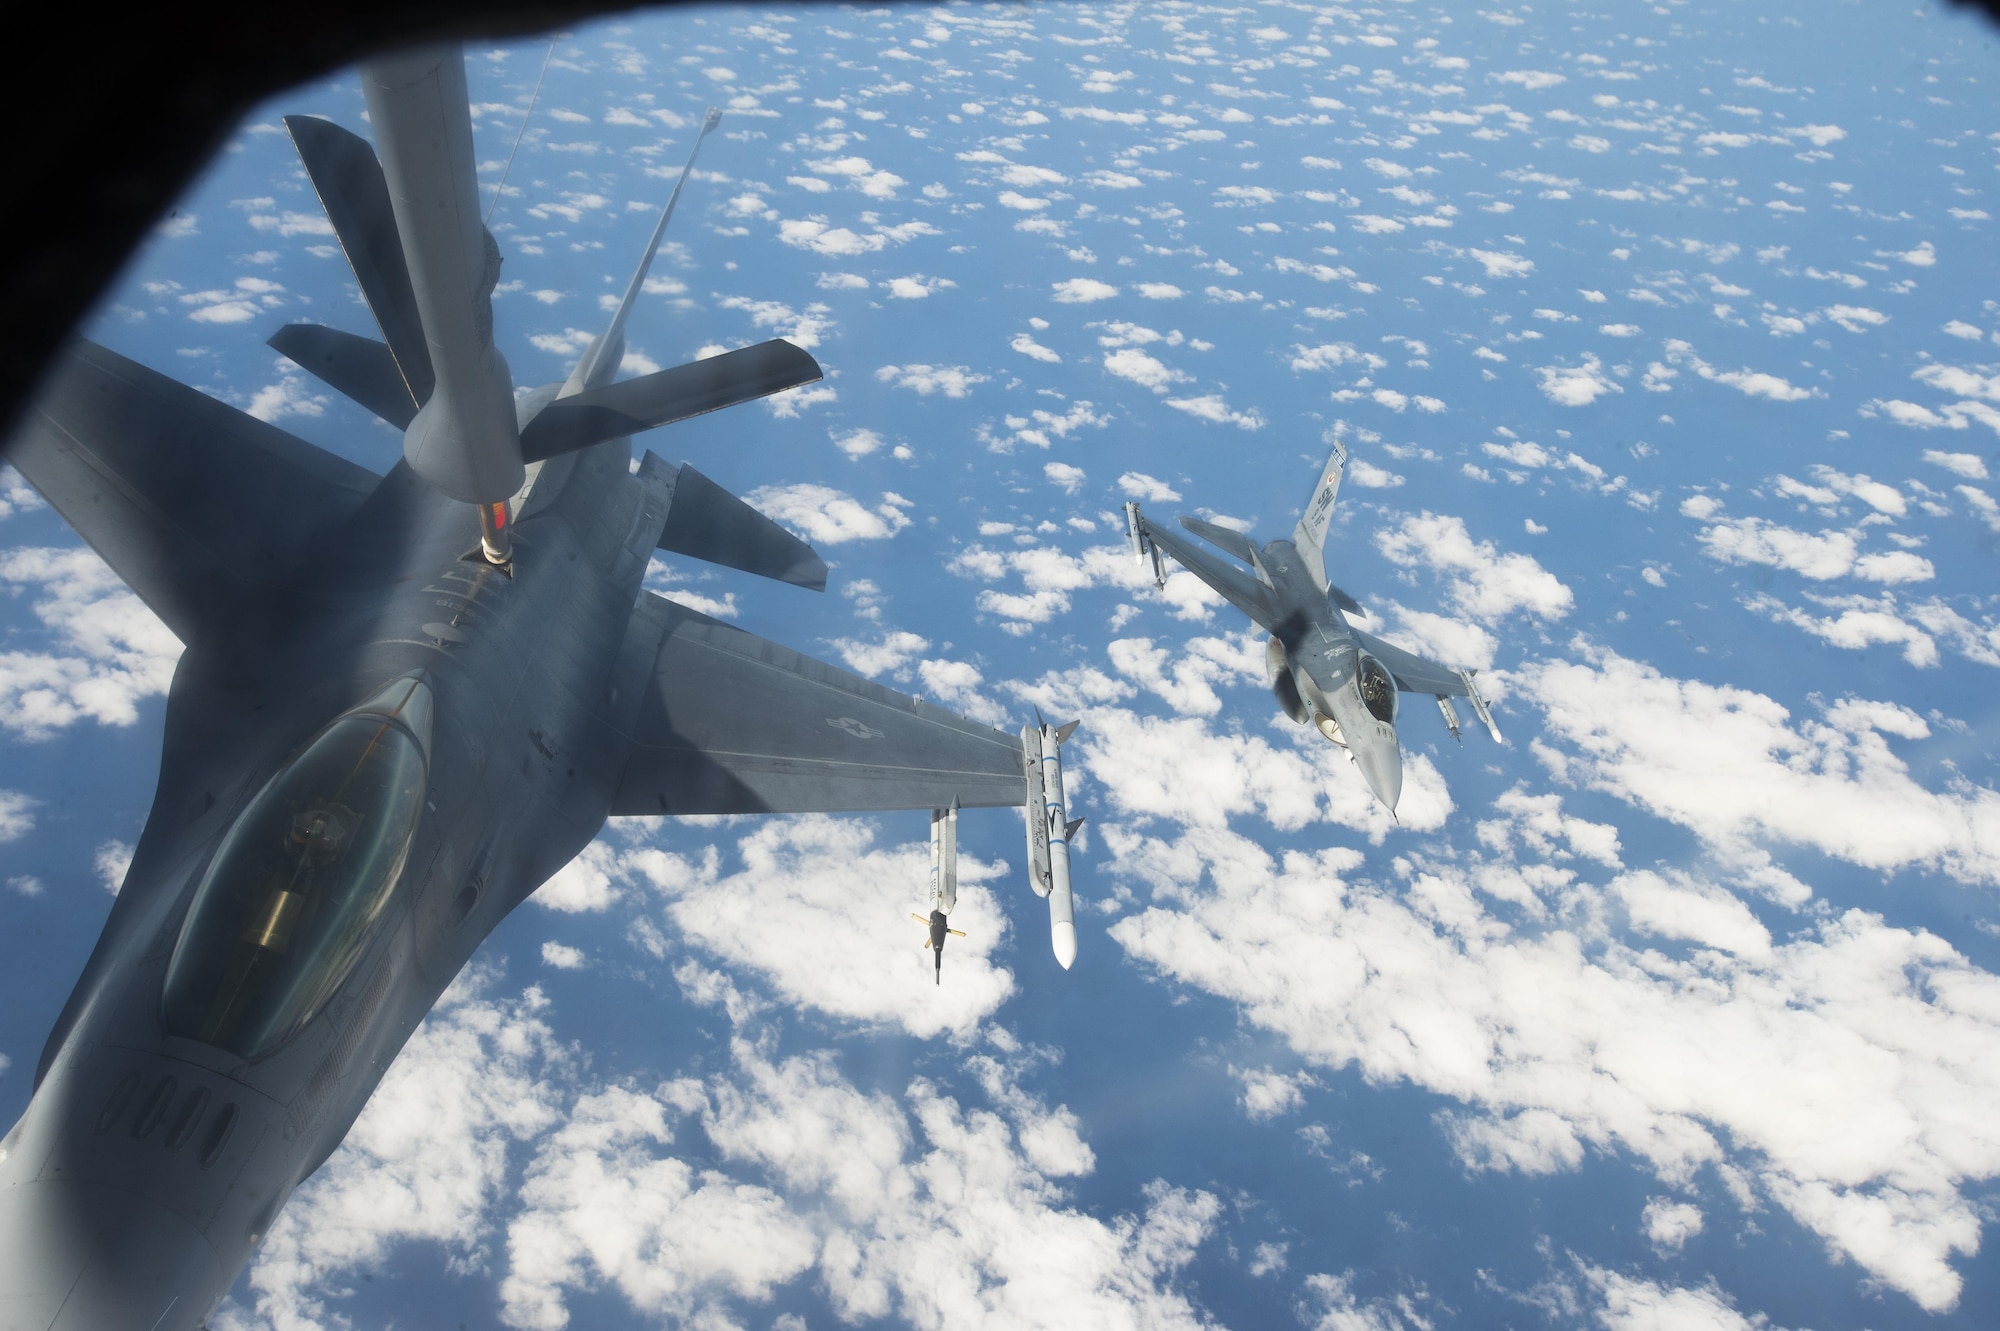 A U.S. Air Force F-16CM Fighting Falcon assigned to the 20th Fighter Wing refuels from a KC-135 Stratotanker assigned to the 93rd Air Refueling Squadron from Fairchild Air Force Base, Wash., as another Team Shaw F-16 approaches over the Atlantic Ocean, Dec. 21, 2016. Airmen from the 93rd RS spent a week at Shaw for collaborative refueling training, giving Team Shaw F-16 pilots the opportunity to practice refueling procedures under various conditions. (U.S. Air Force photo by Senior Airman Zade Vadnais)